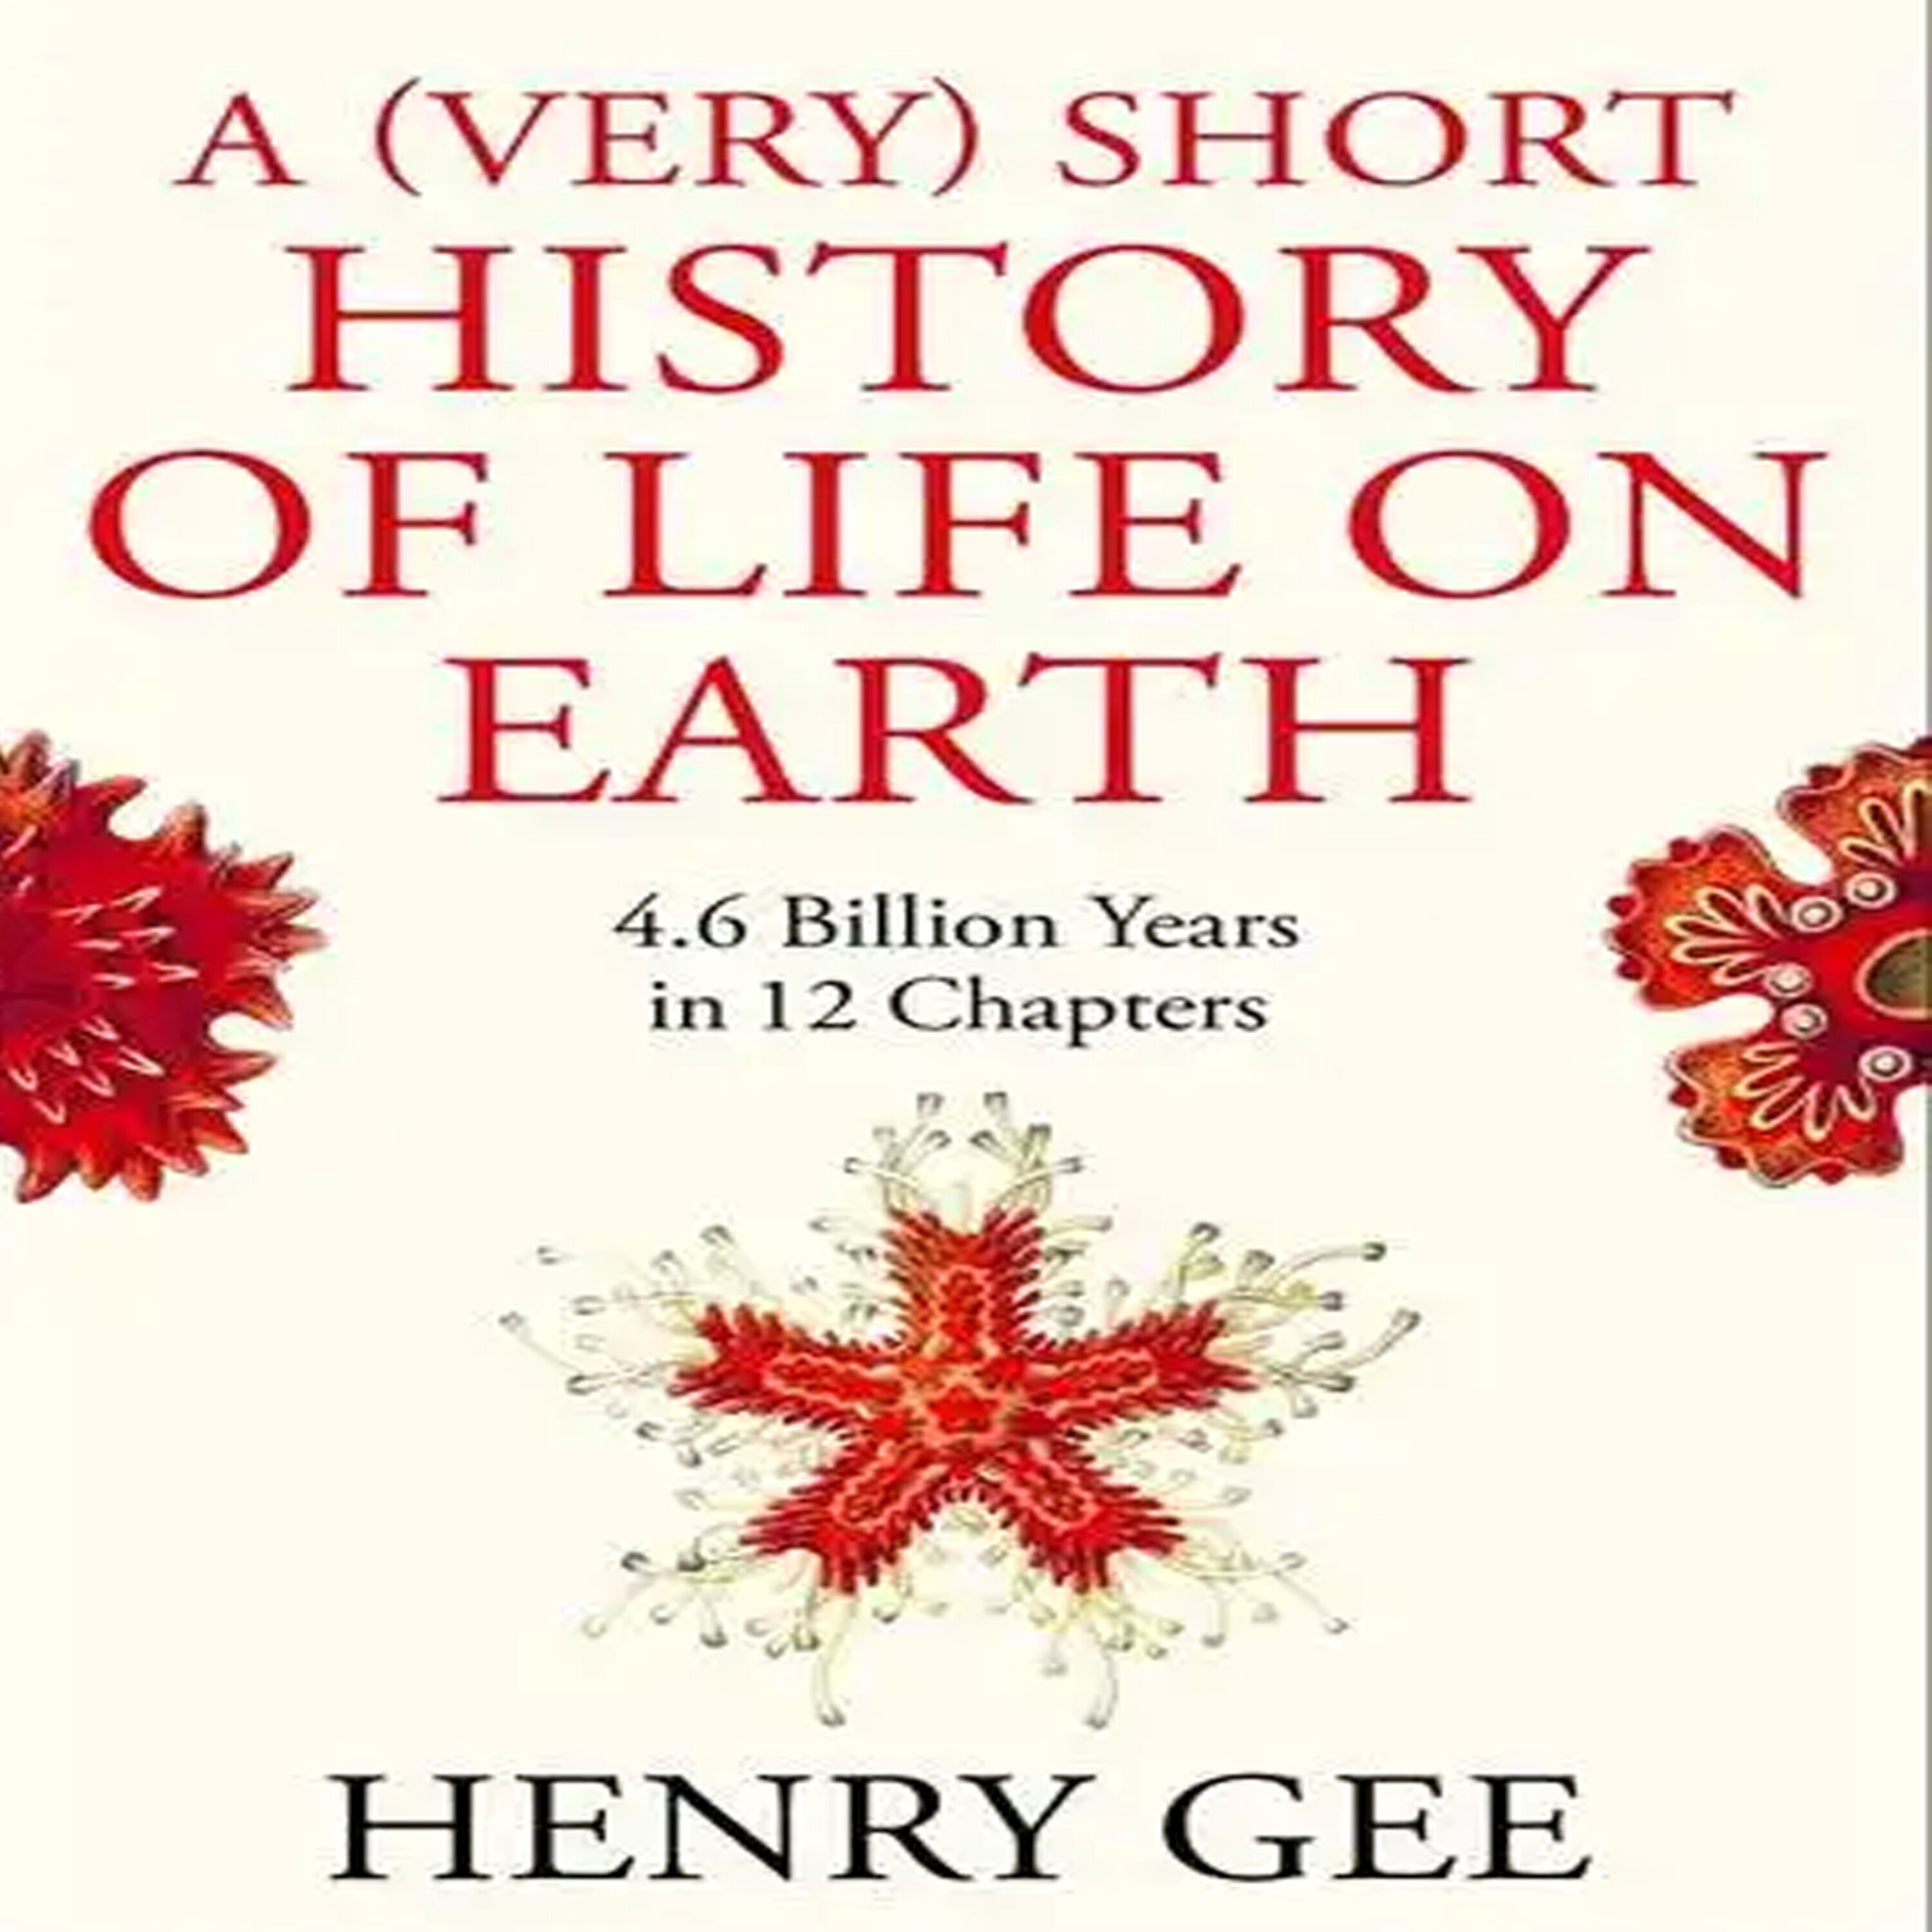 A (Very) Short History of Life On Earth w/ Henry Gee | 261